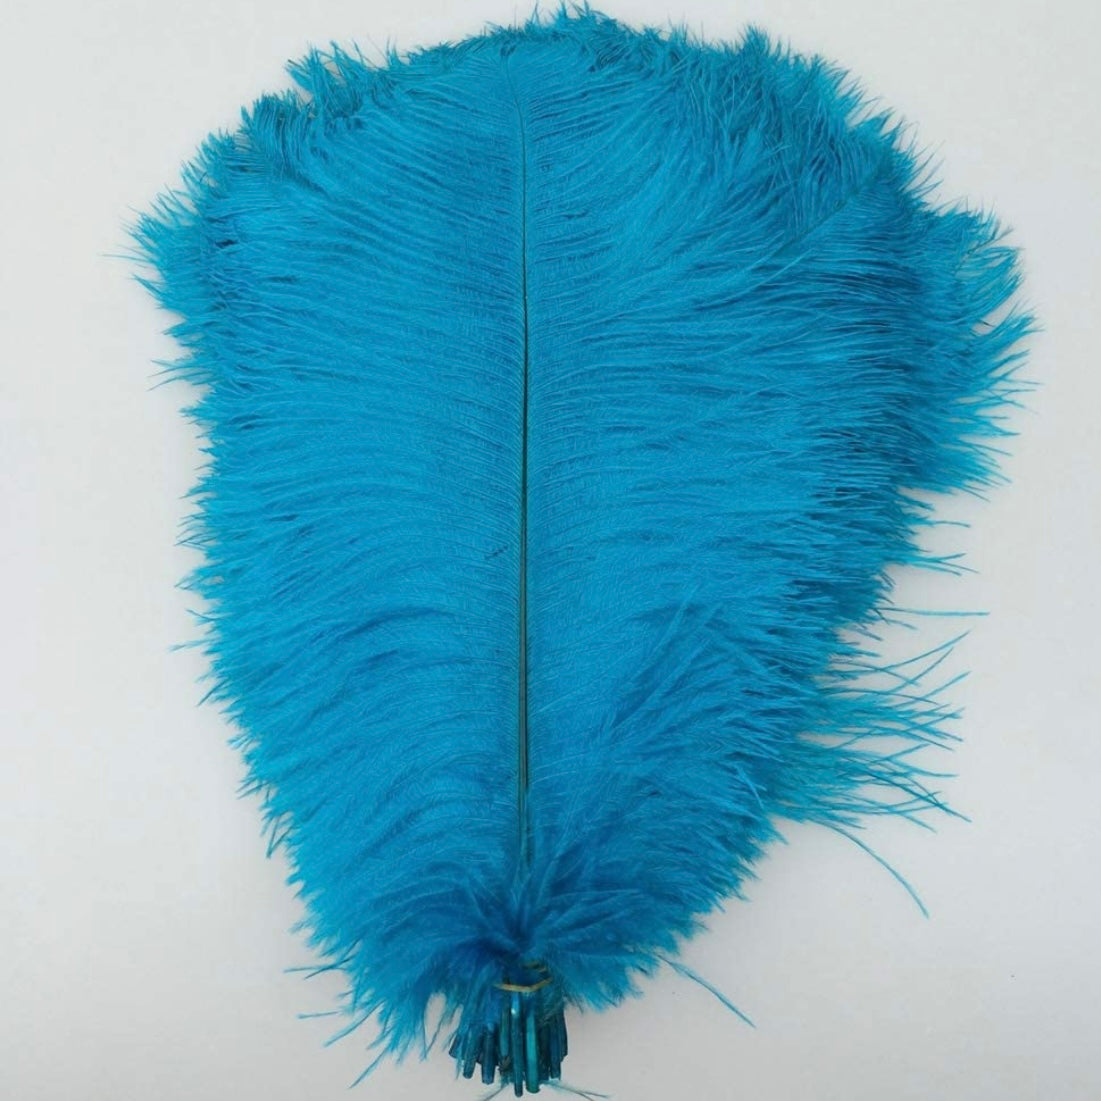 Large Light Blue Feathers